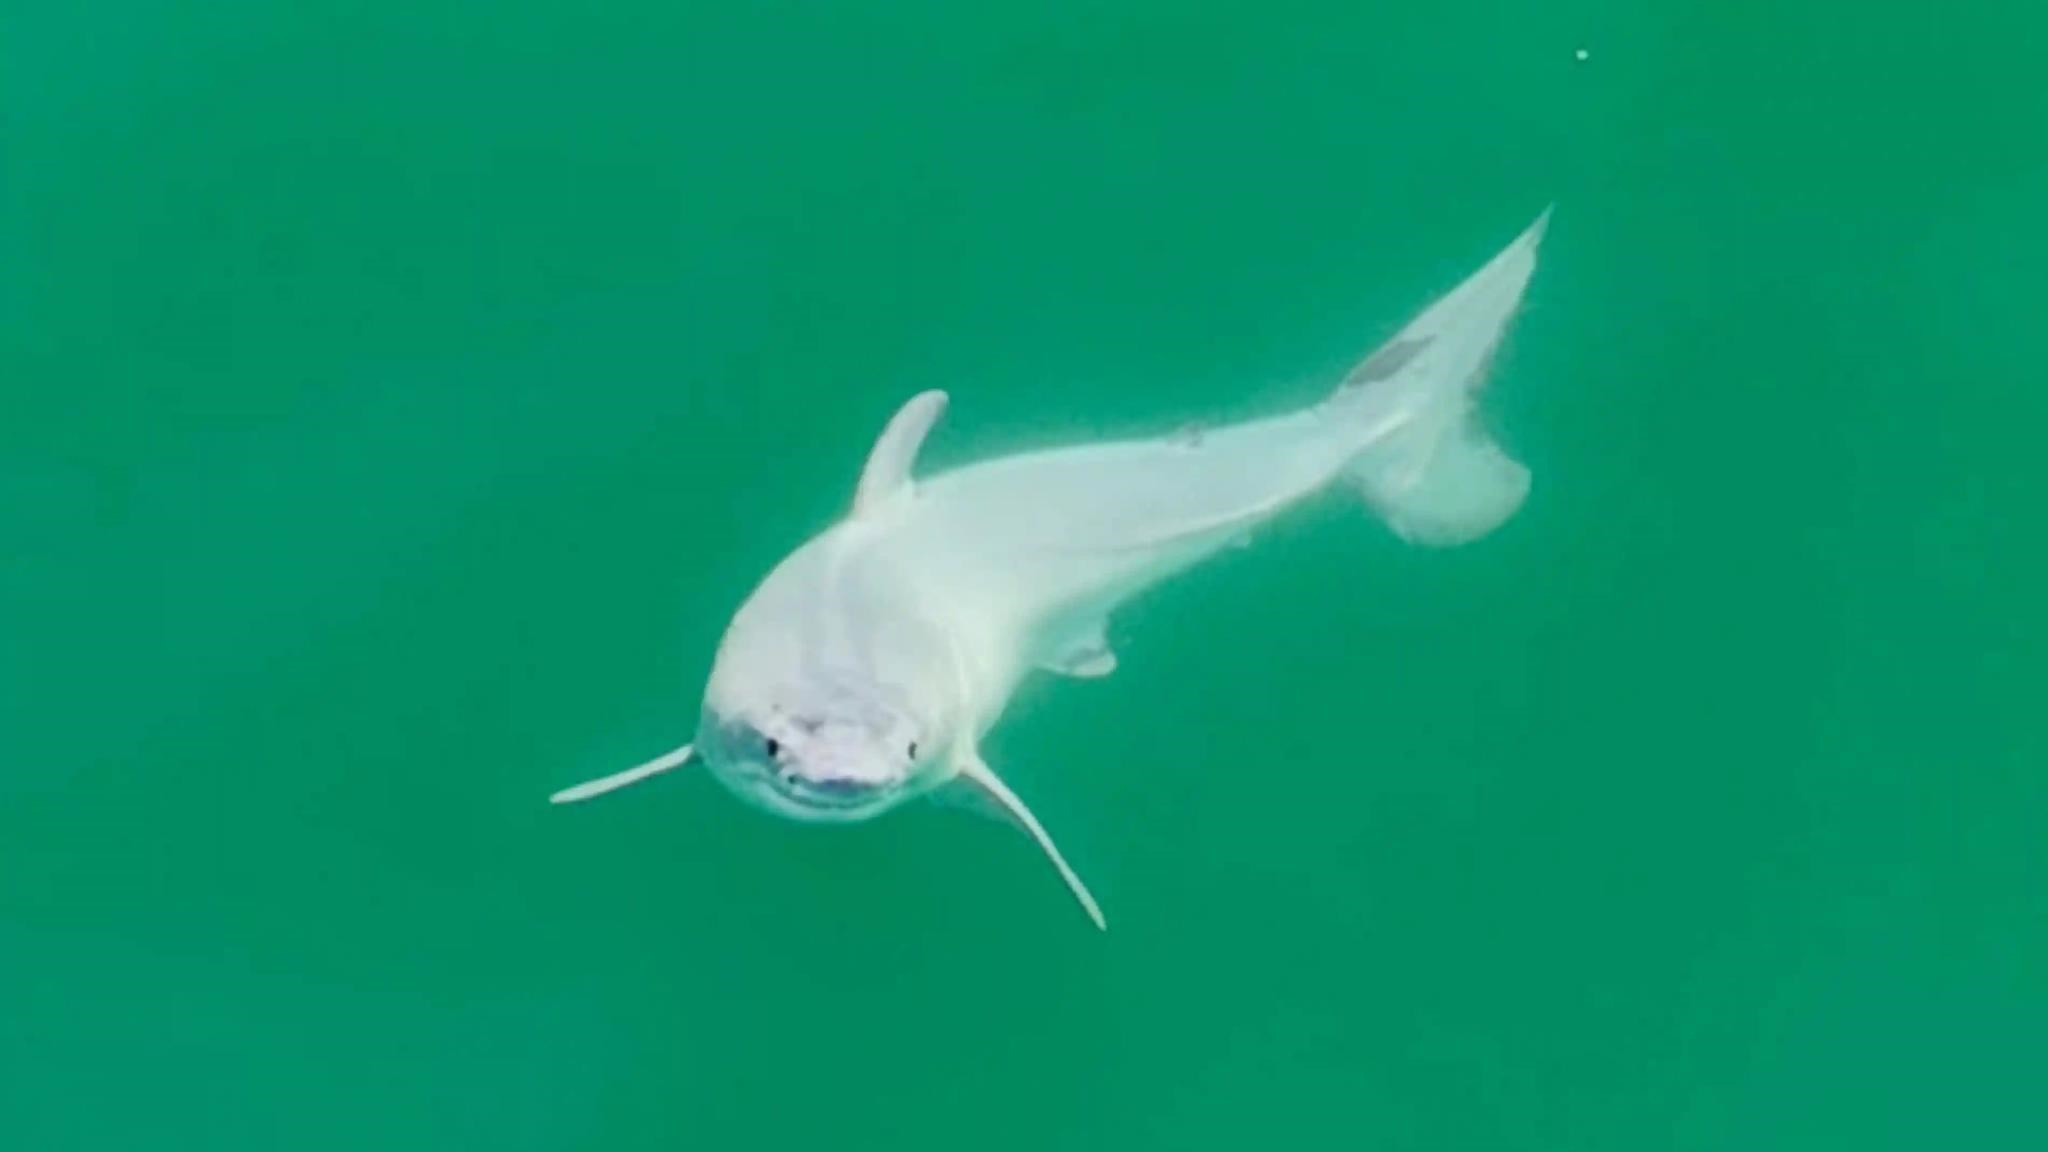 Technology: Unprecedented: A newborn white shark may have been caught for the first time – video